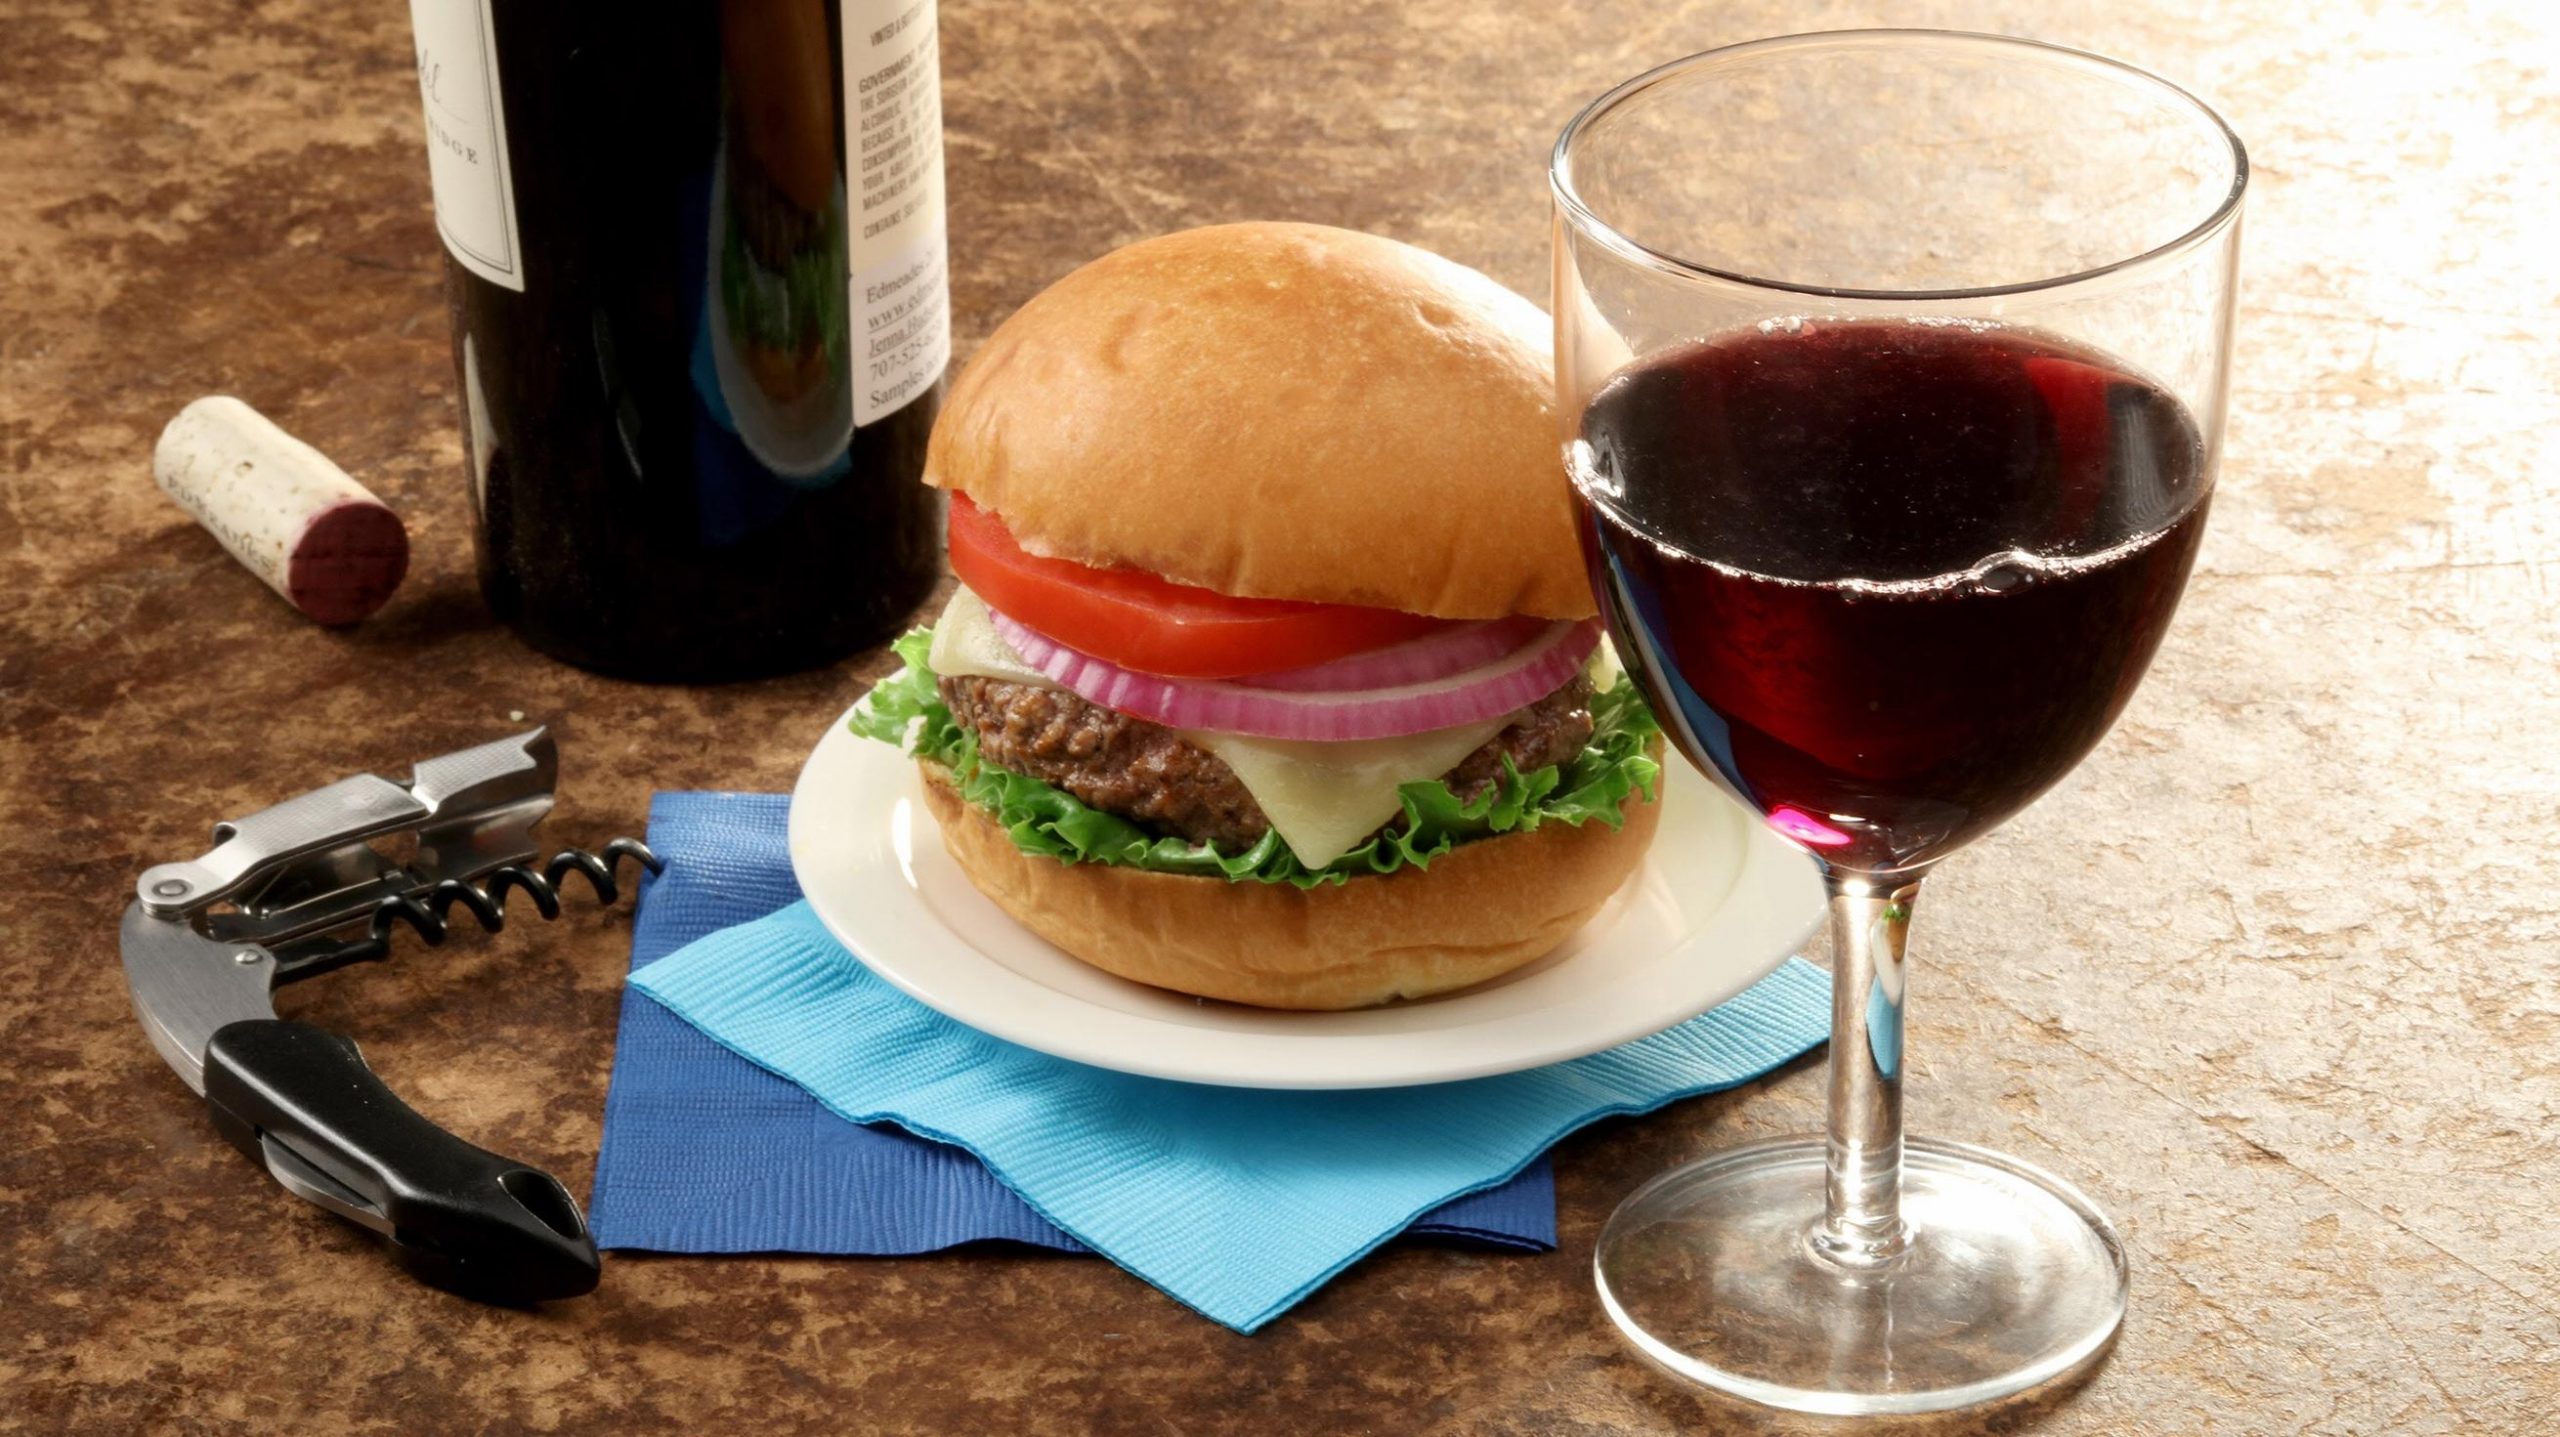 10 wines to pair with that grilled burger